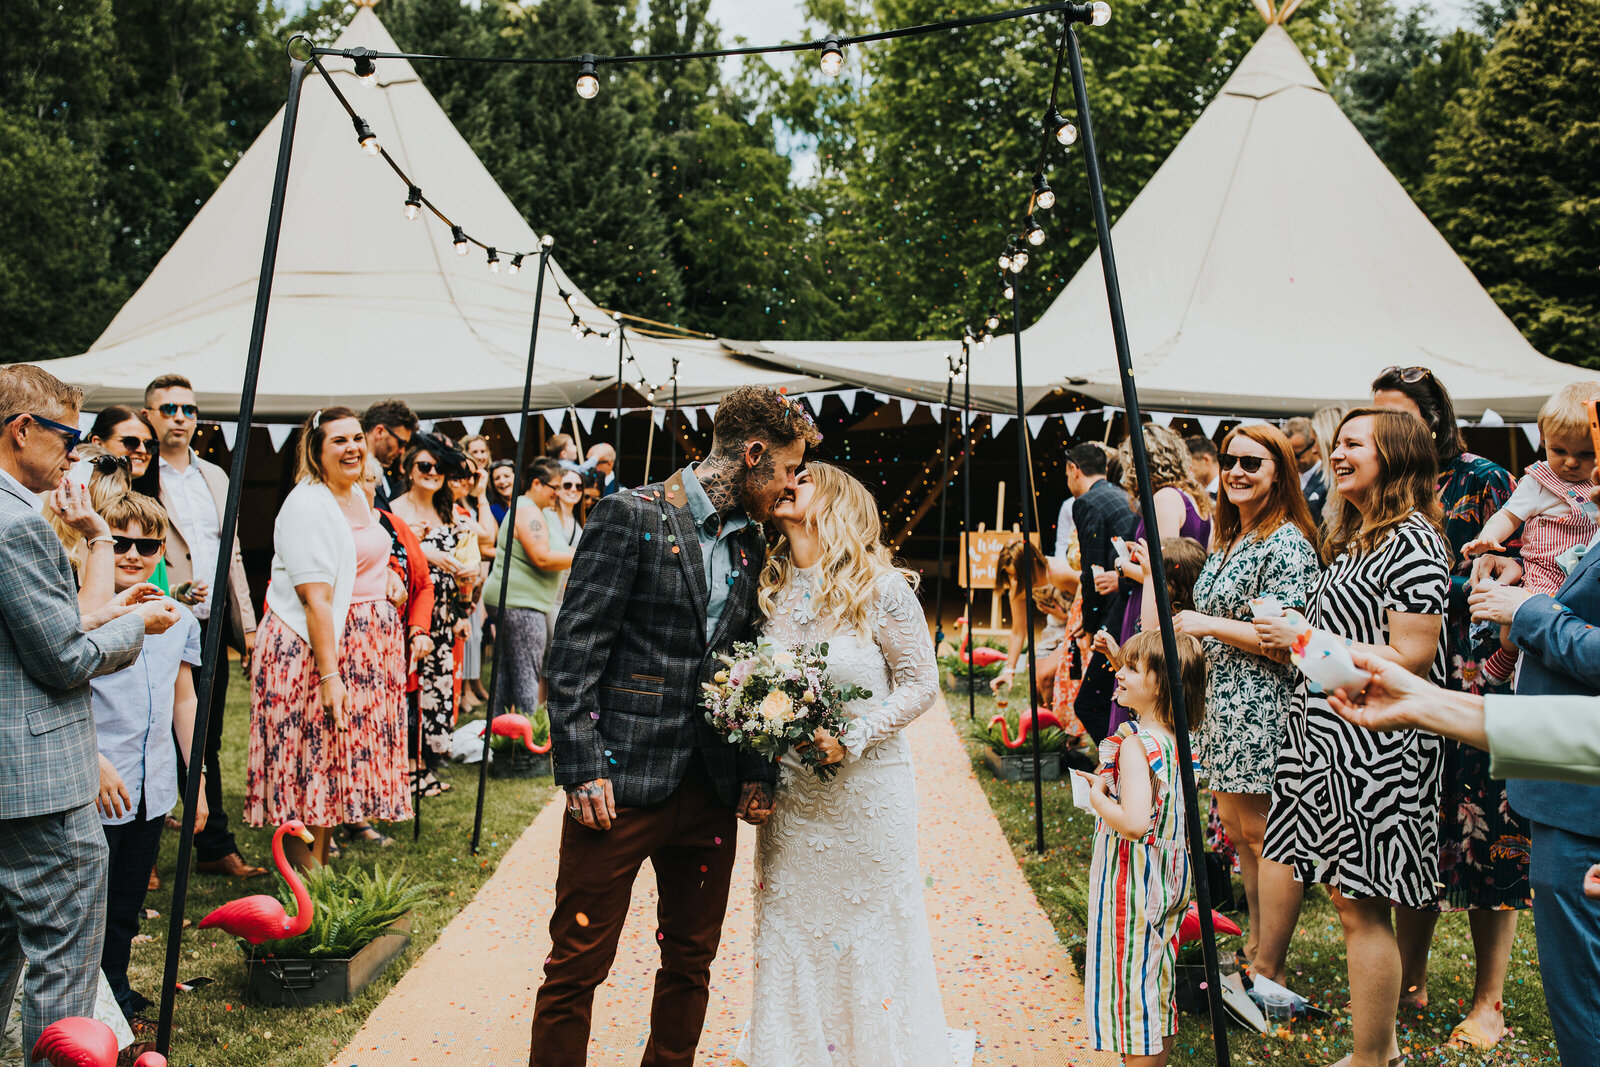 Nottingham Fun Documentary Candid Untraditional Wedding Photography - Sophie Ann Photography Tipi Wedding Alternative Wedding Photography (2)